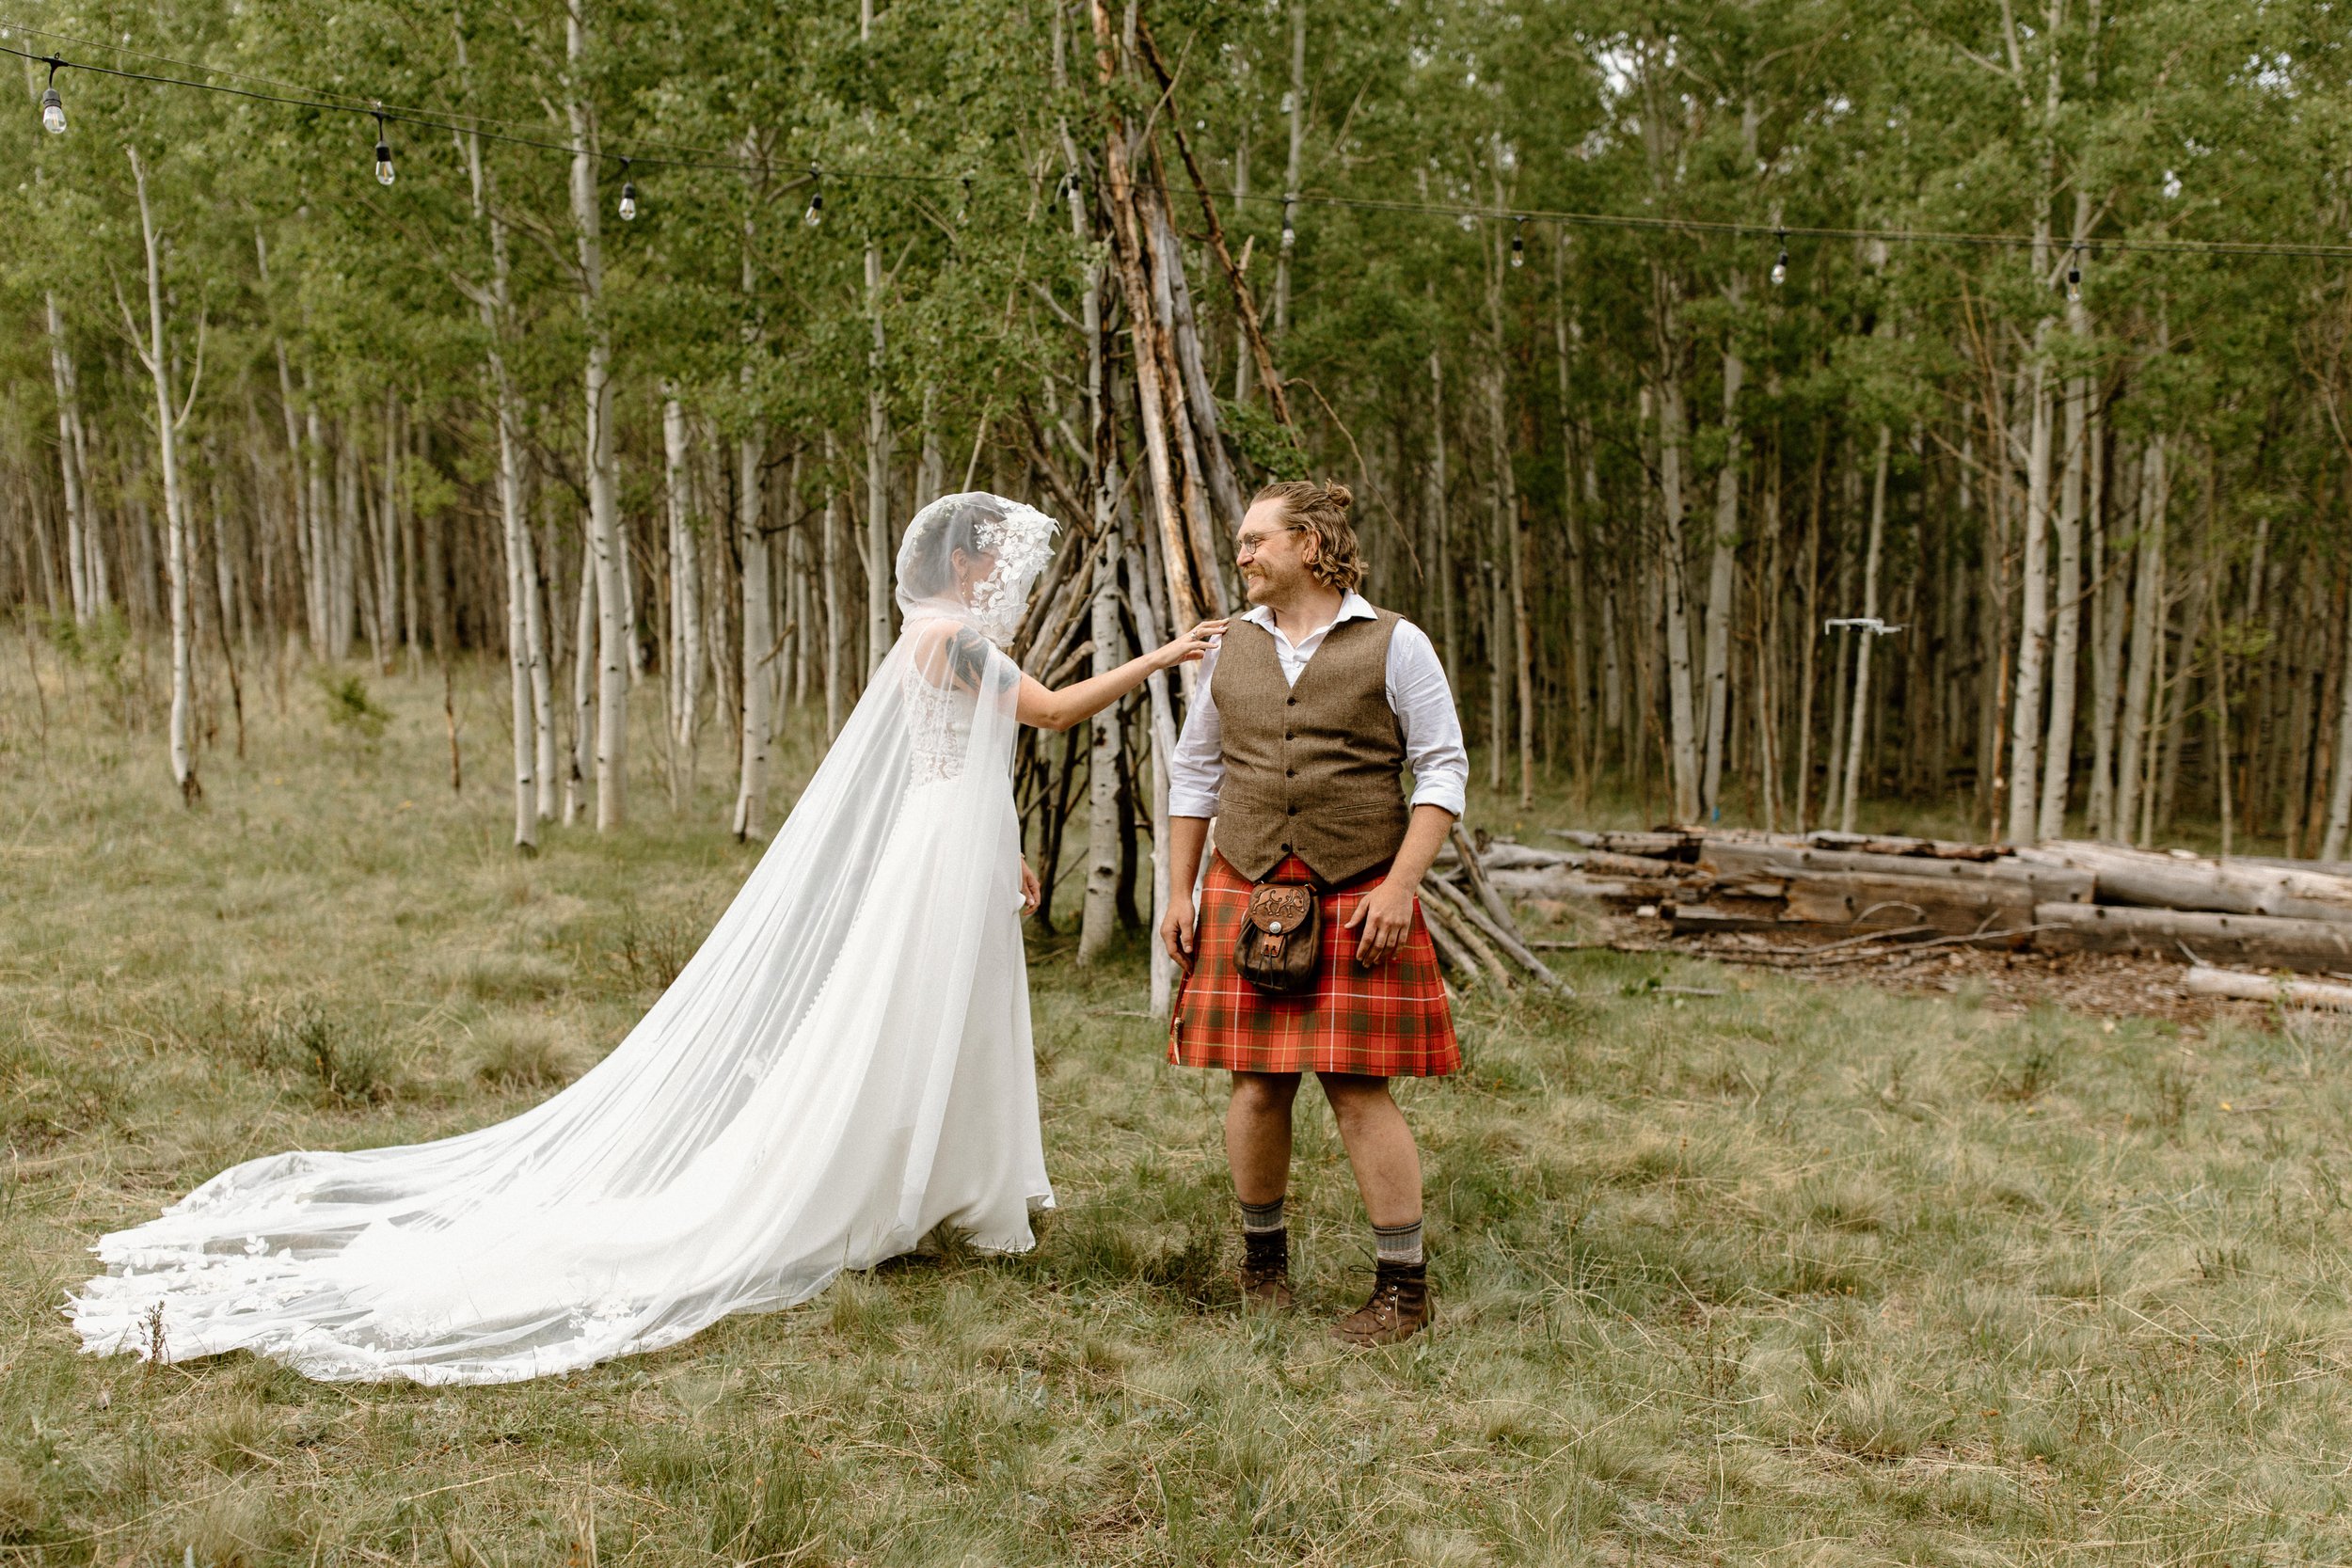 First look at Jordan and Molly's intimate wedding in Fairplay, Colorado